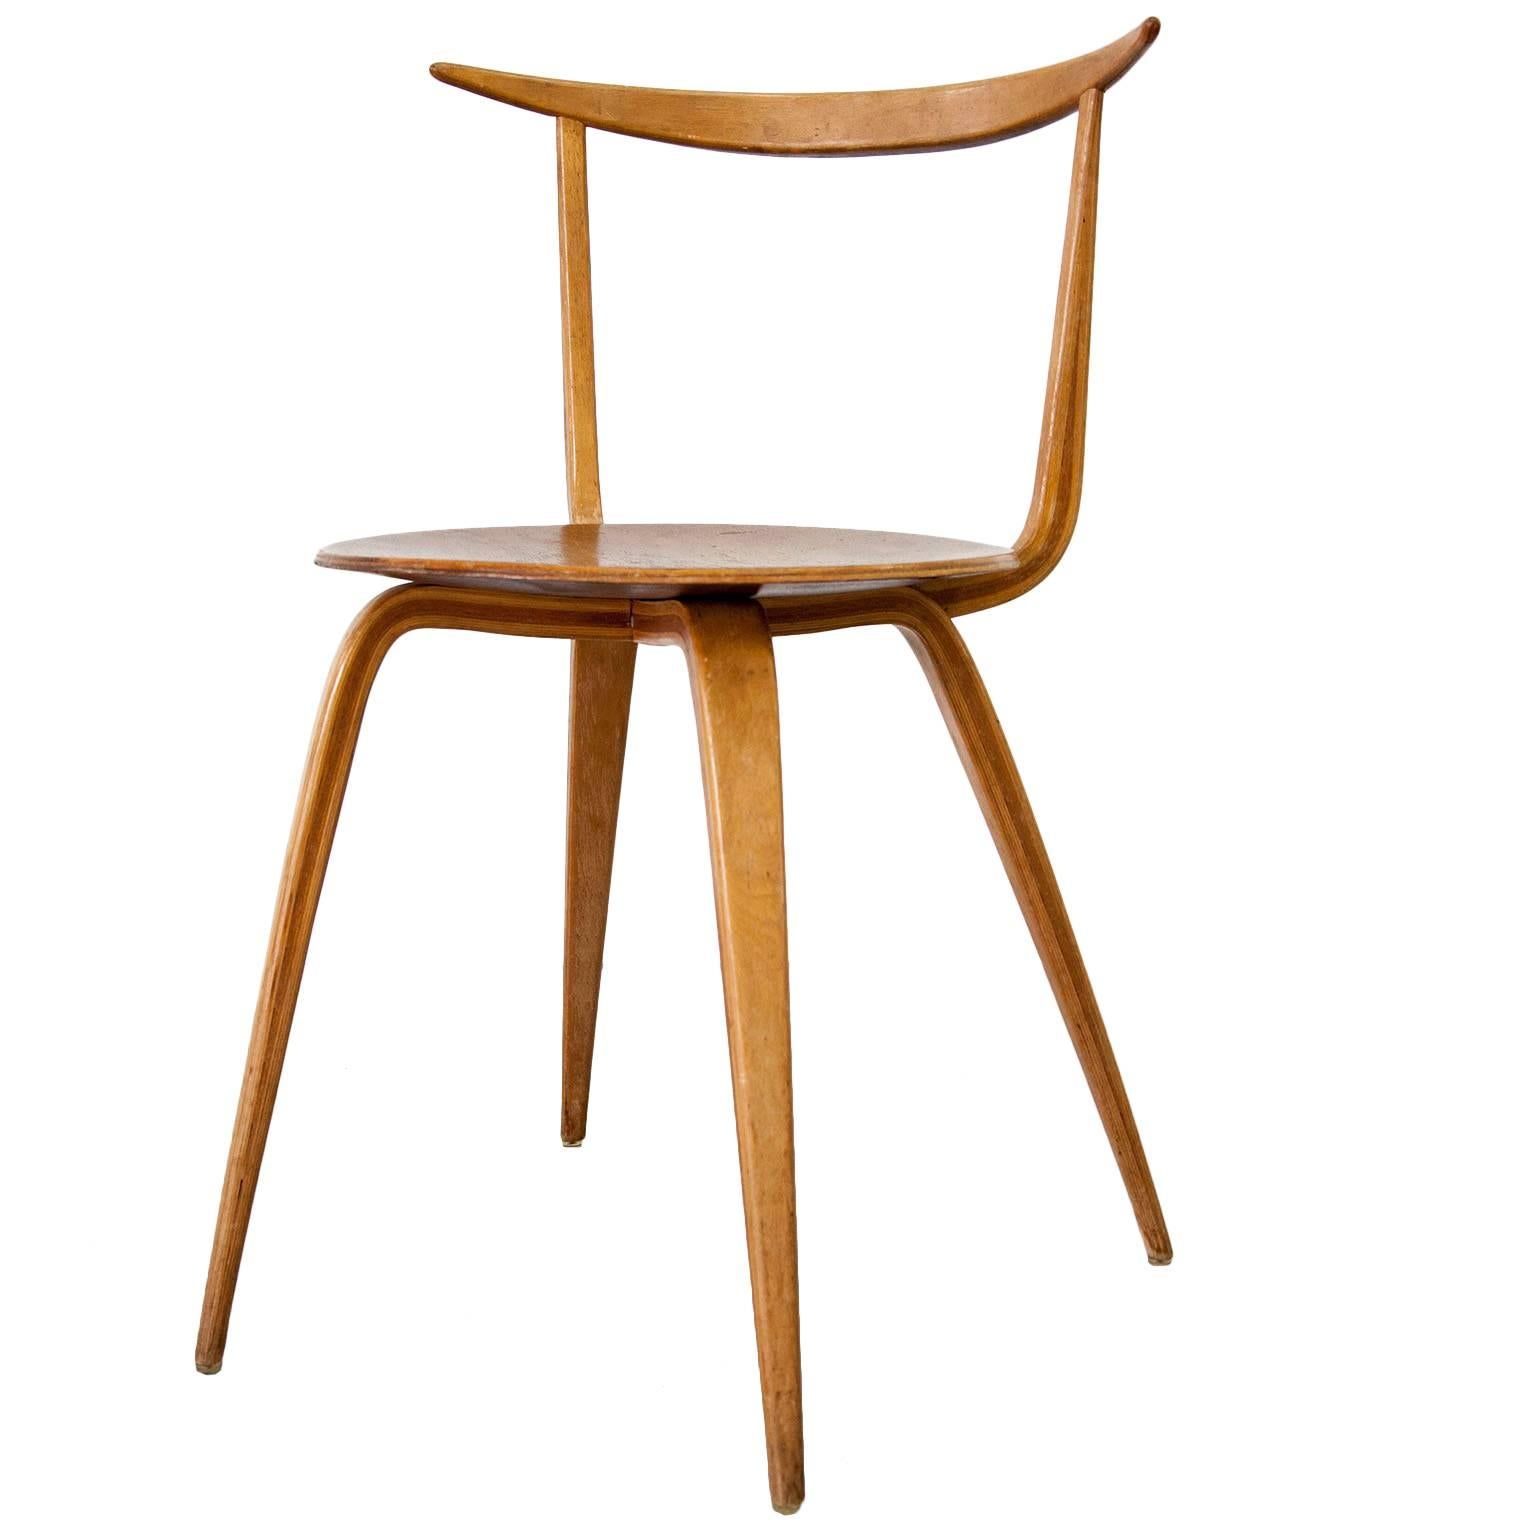 Early Version of the Rare Pretzel Chair by George Nelson For Sale